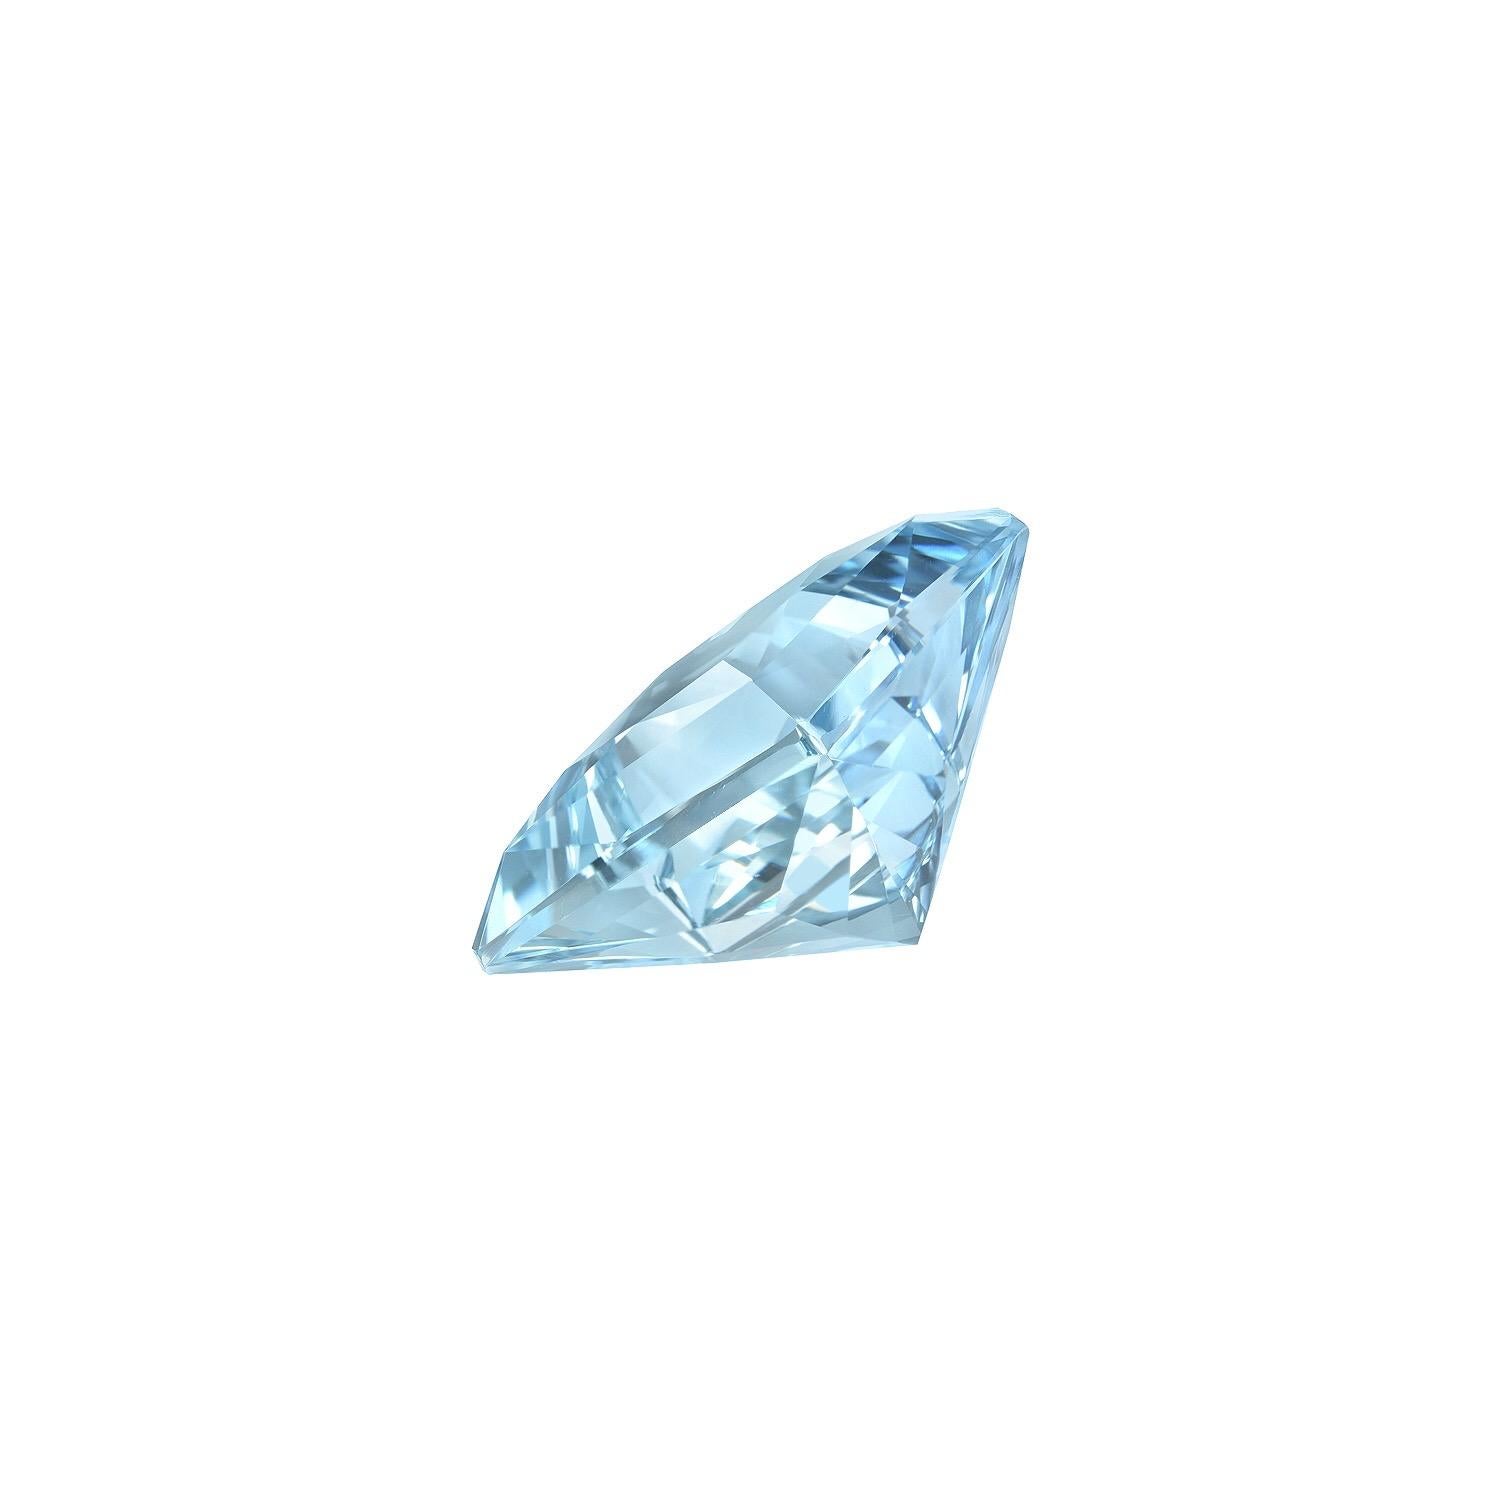 Incredible 21.71 carat Aquamarine Princess Cut gem, offered loose to a spectacular gemstone lover.
Returns are accepted and paid by us within 7 days of delivery.
We offer supreme custom jewelry work upon request. Please contact us for more